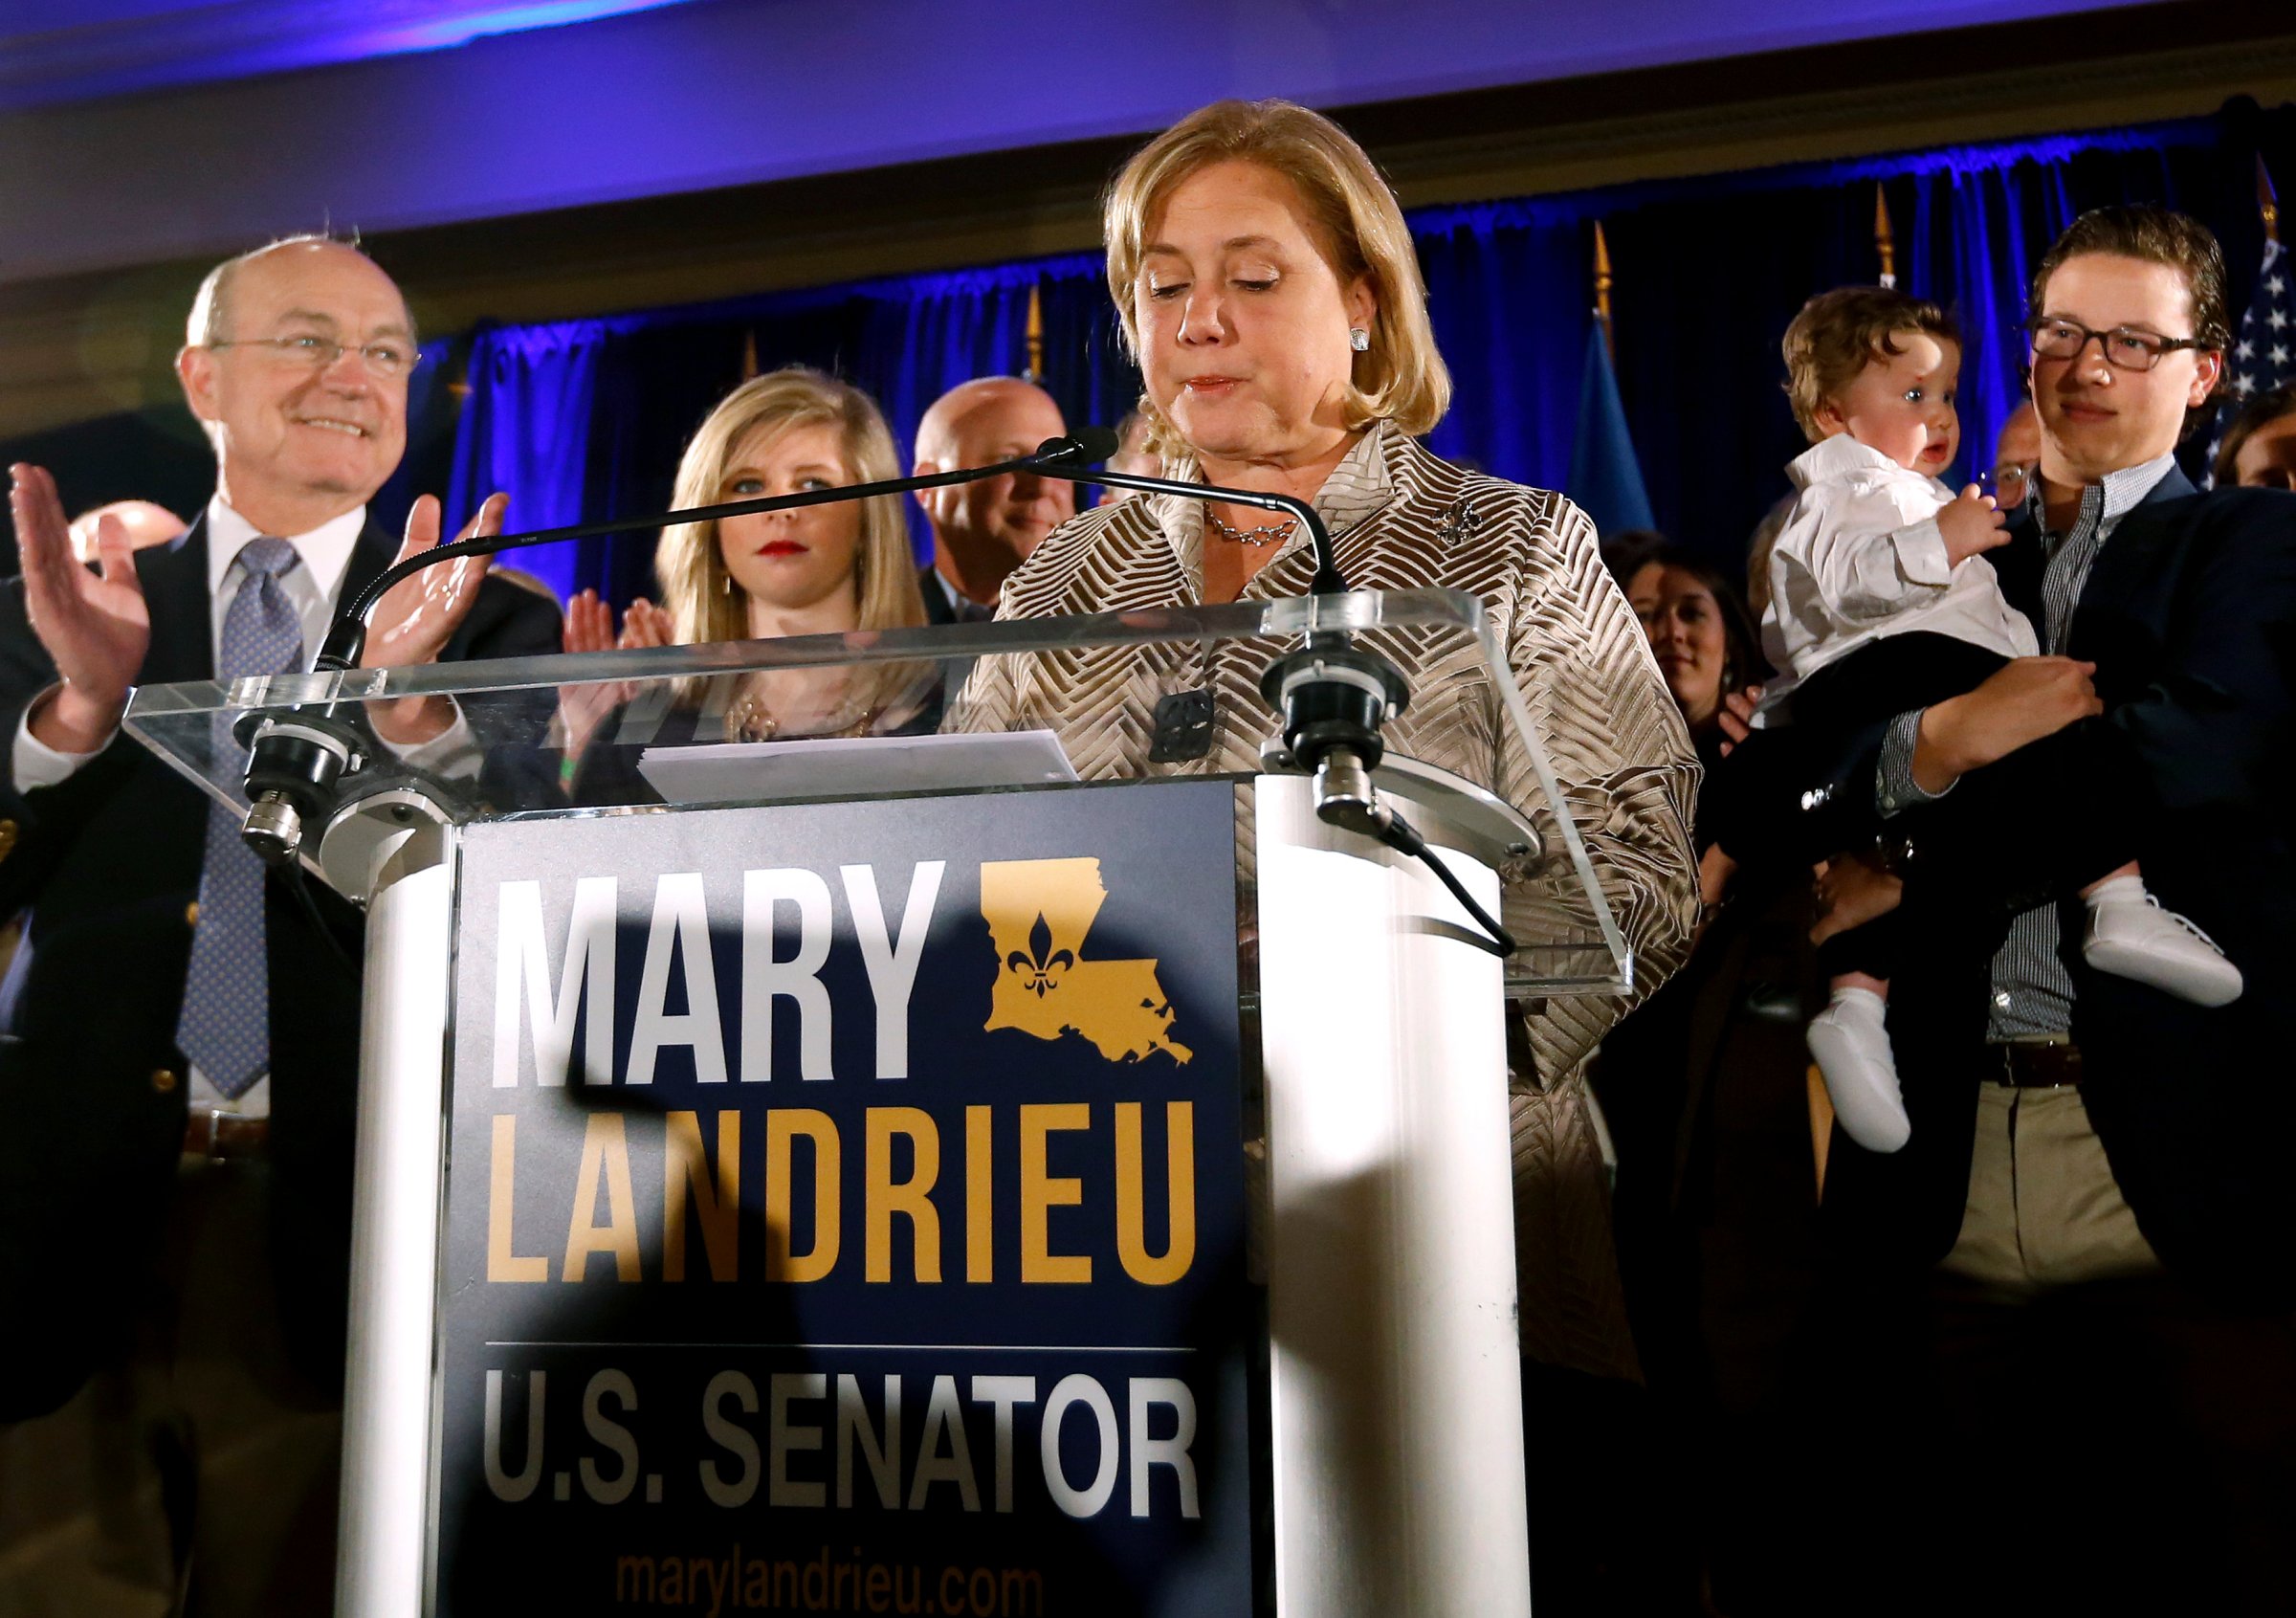 Democratic Senator Landrieu reacts while delivering a concession speech after the results of the U.S. Senate race in Louisiana during a runoff in New Orleans